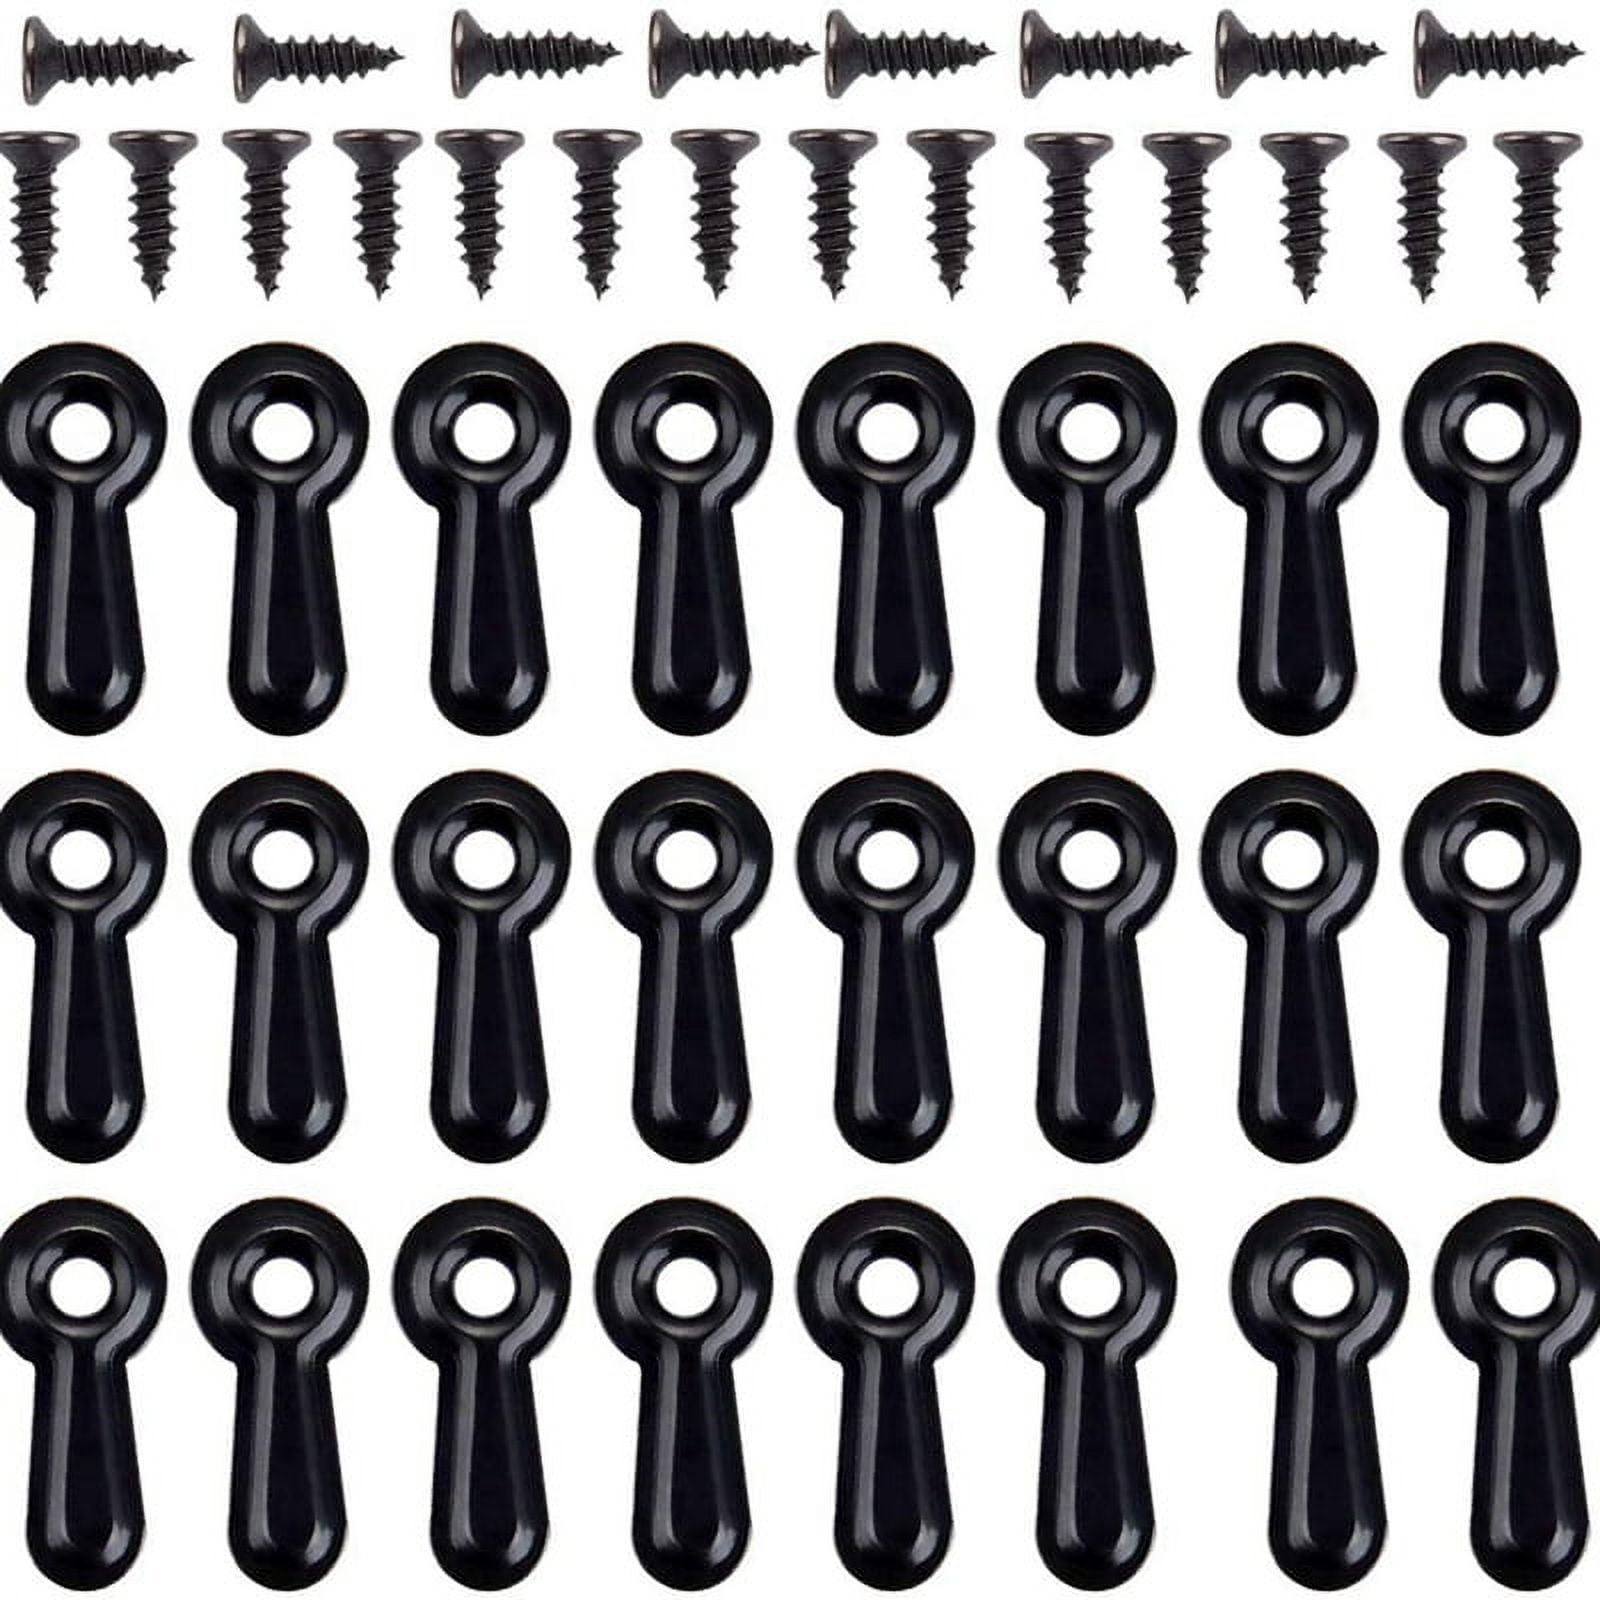 dophee 100Pcs Picture Frame Hardware Backing Clips, Metal Turn Button  Fastener with Mounting Screws for Picture Mirror Scrapbook Photo Frame  Backboard Posters Drawing Crafts, Black 